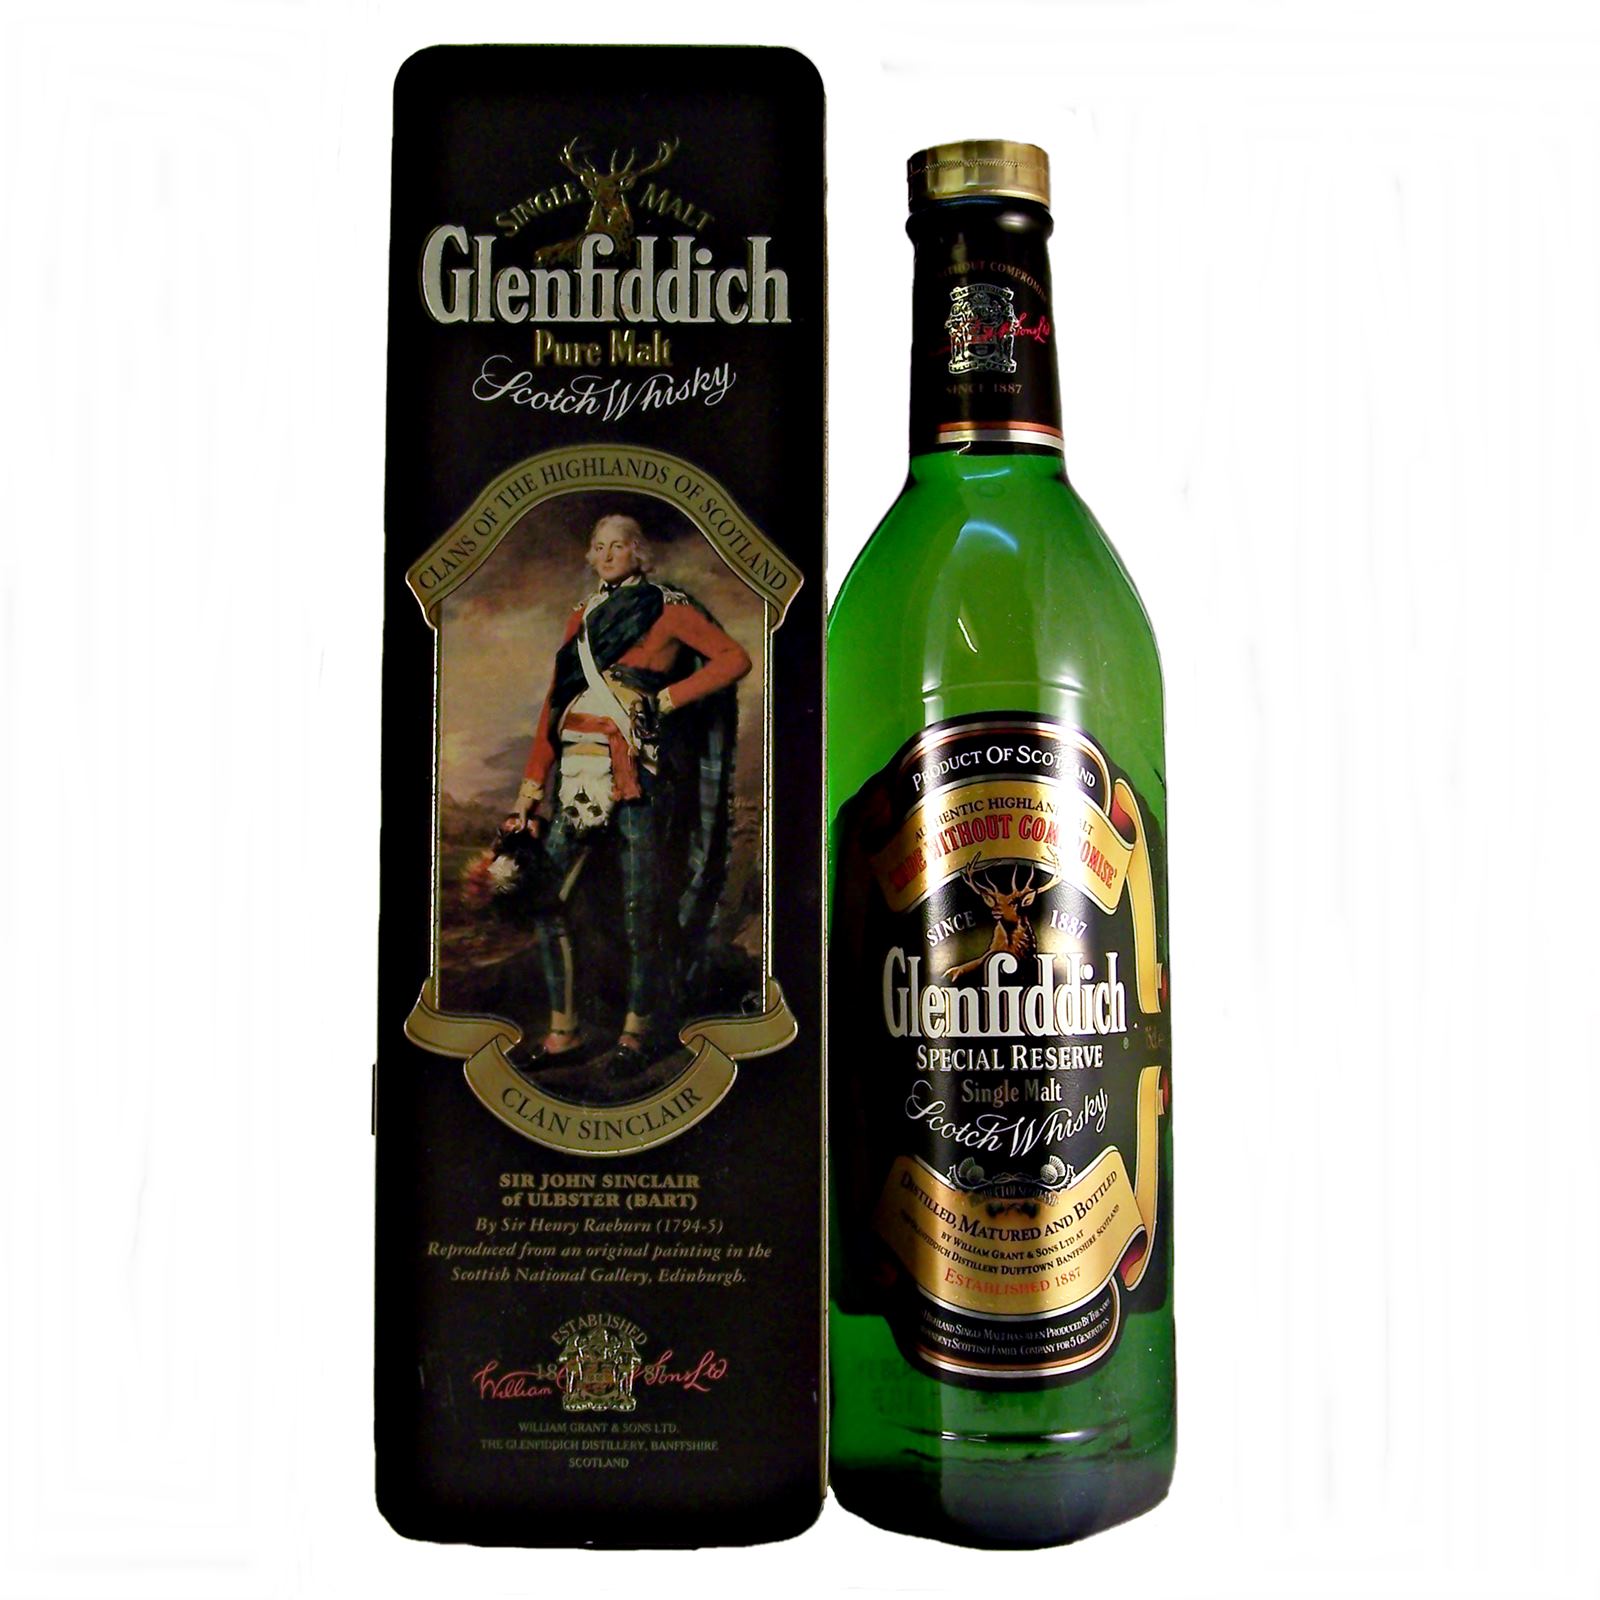 Glenfiddich Special Old Reserve 'Clan Sinclair' Pure Malt Scotch Whisky 750ml